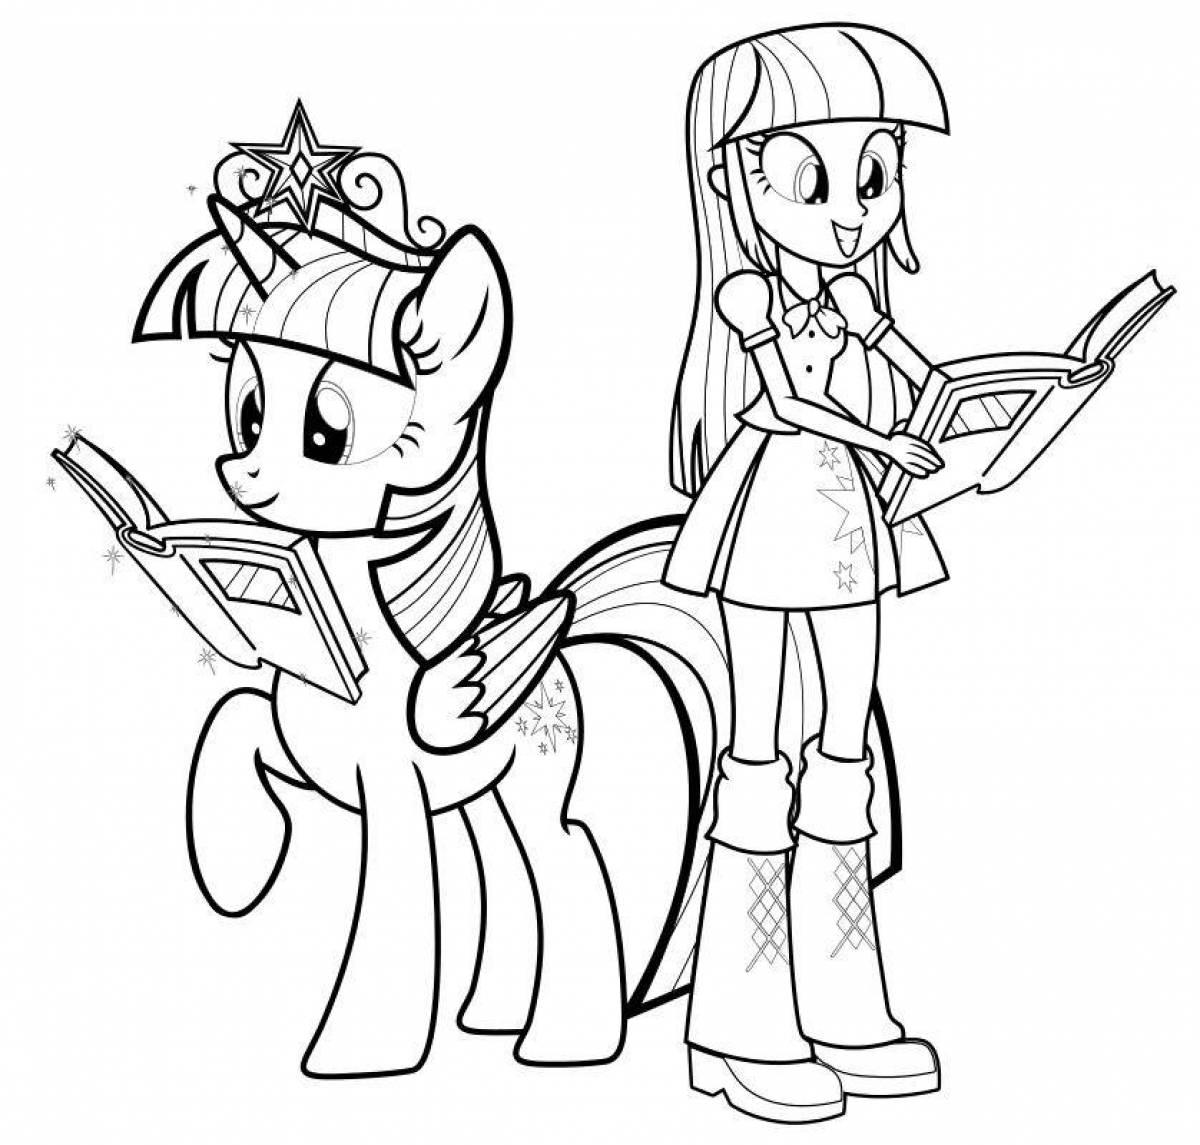 Playful twilight sparkle coloring page